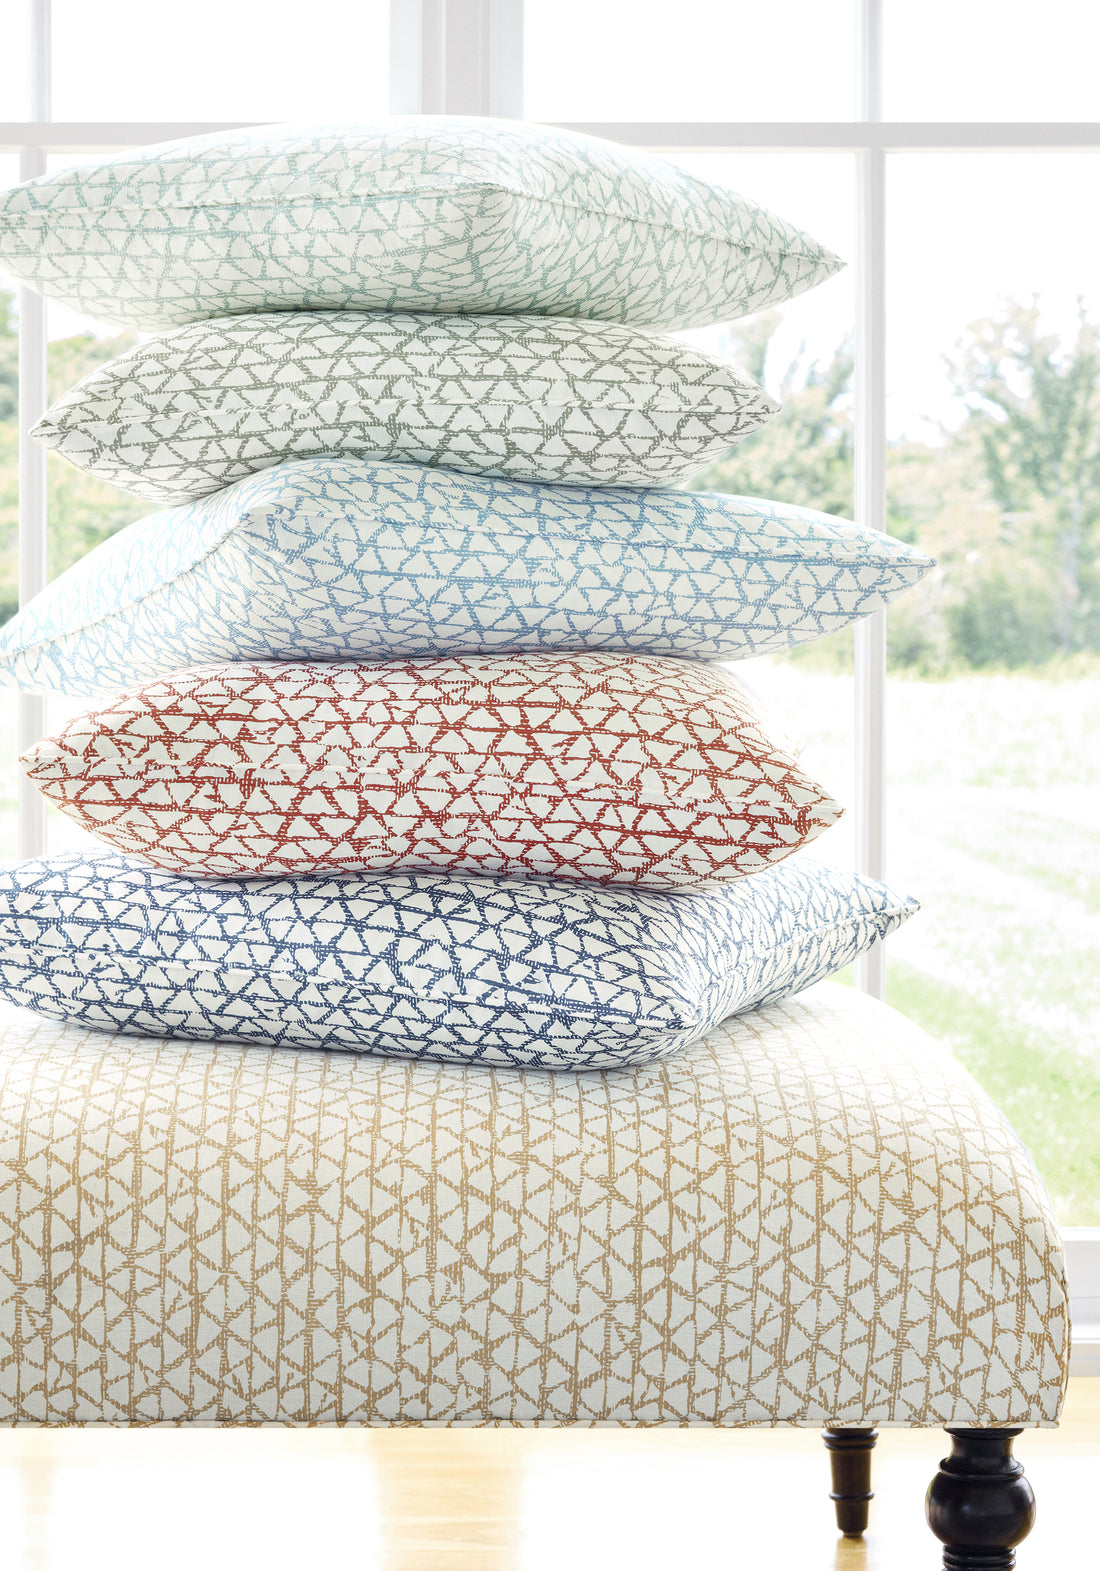 Pillows featuring Maluku fabric in sunbaked color - pattern number F981326 - by Thibaut in the Montecito collection